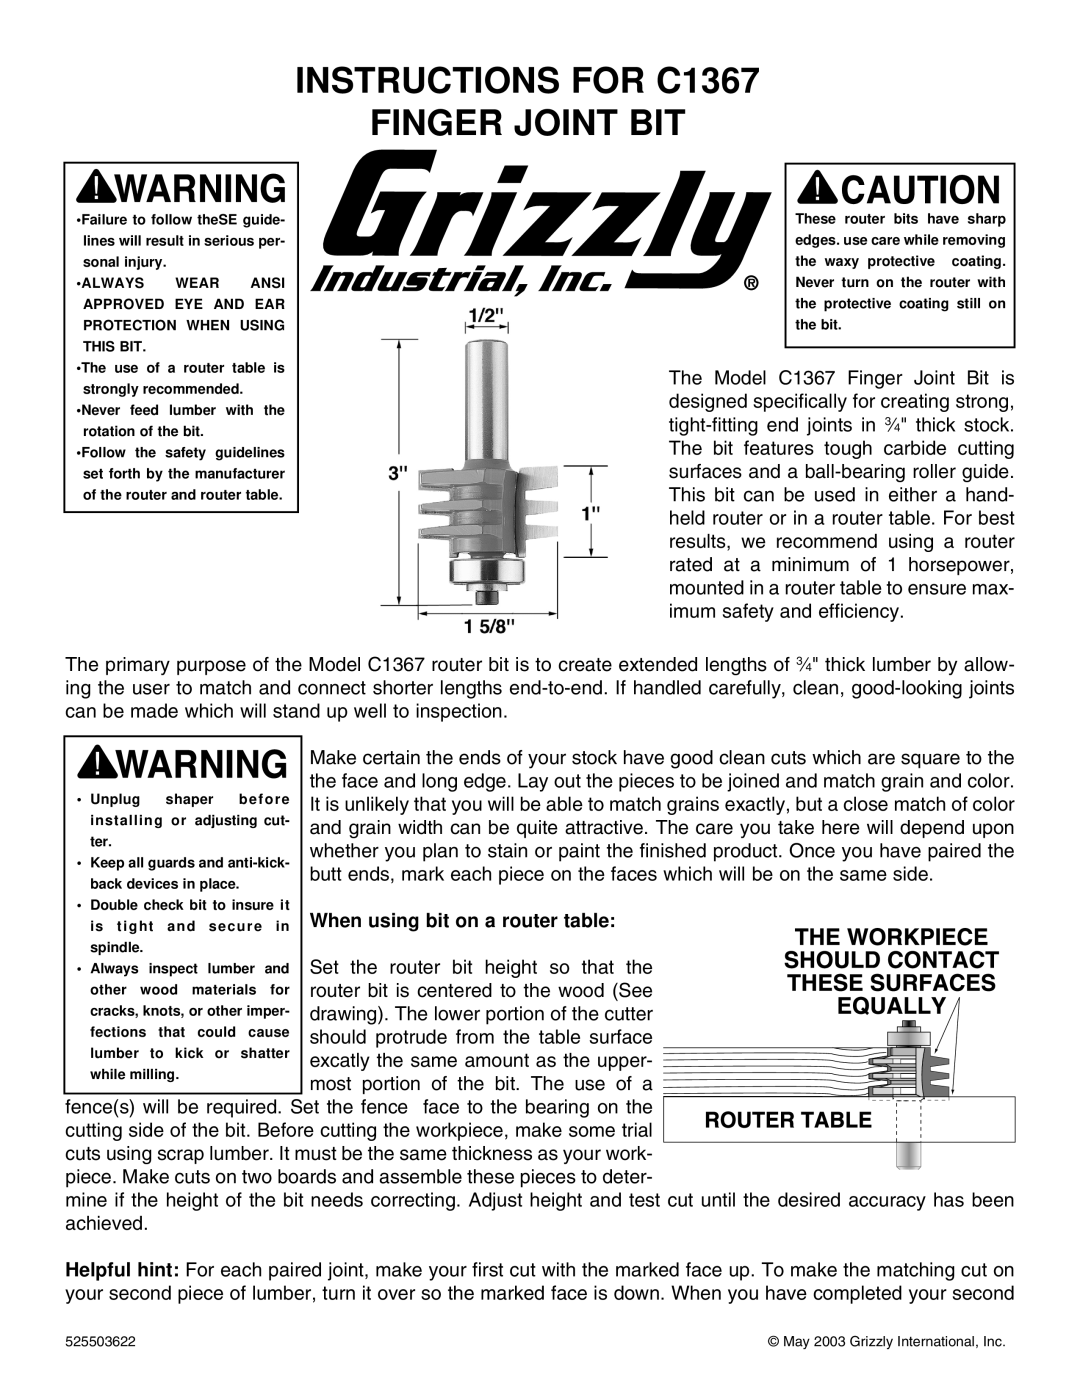 Grizzly manual INSTRUCTIONS FOR C1367 FINGER JOINT BIT 